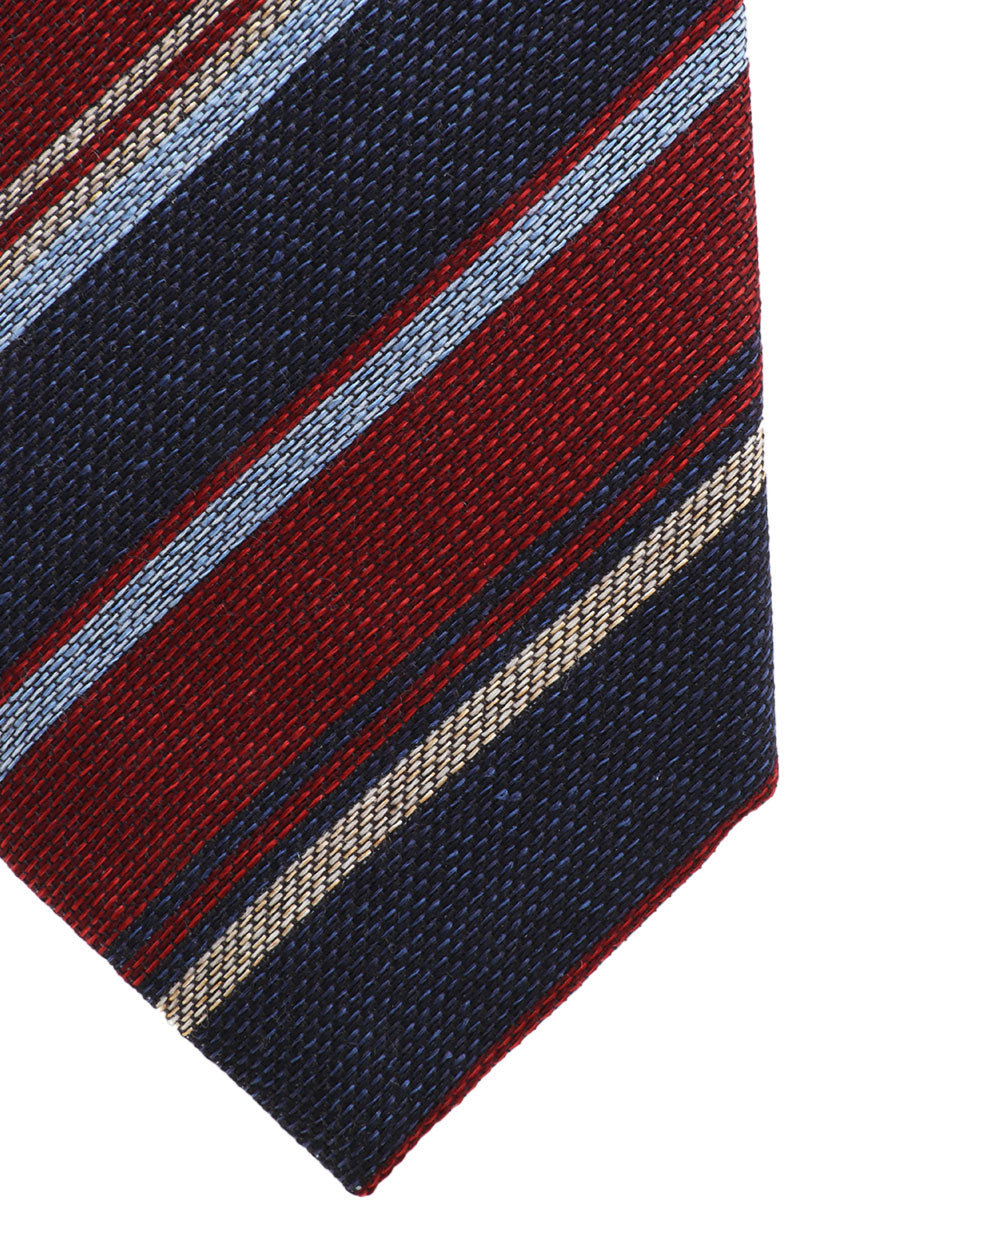 Burgundy and Navy Striped Silk and Cotton Tie